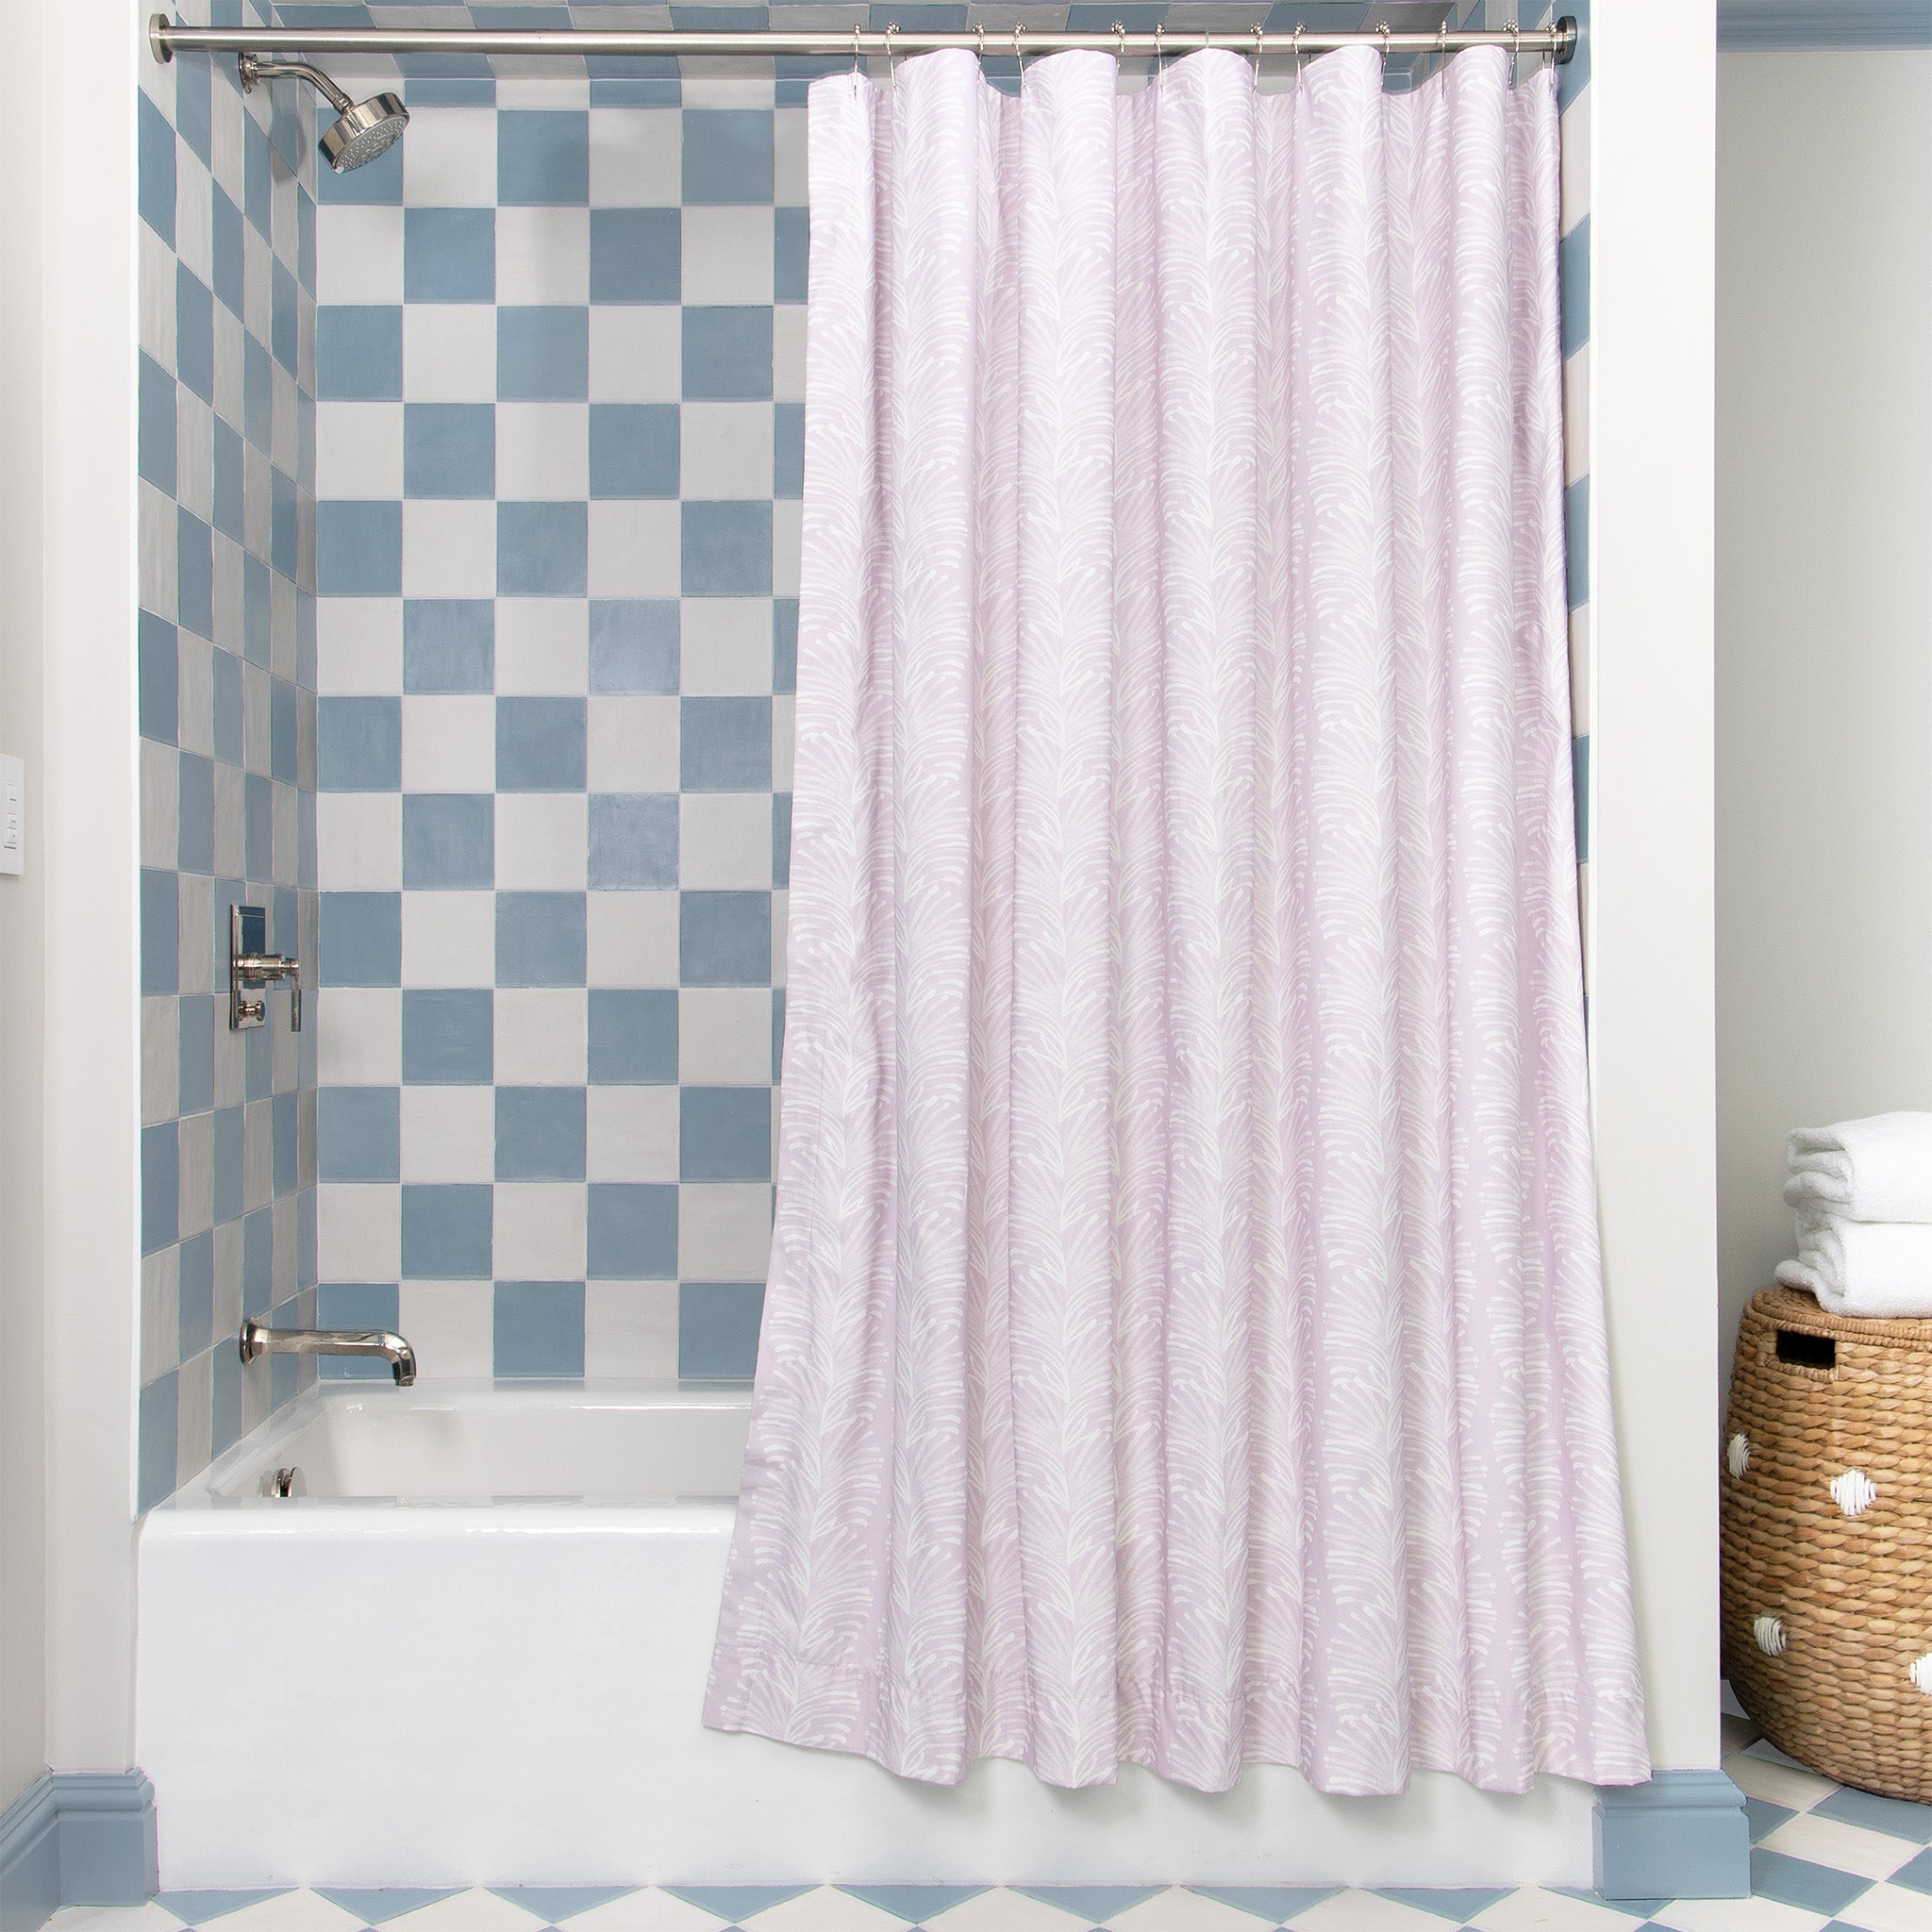 Bath styled with Lavender Botanical Stripe Printed Shower Curtain on metal rod with blue and white checkered wallpaper